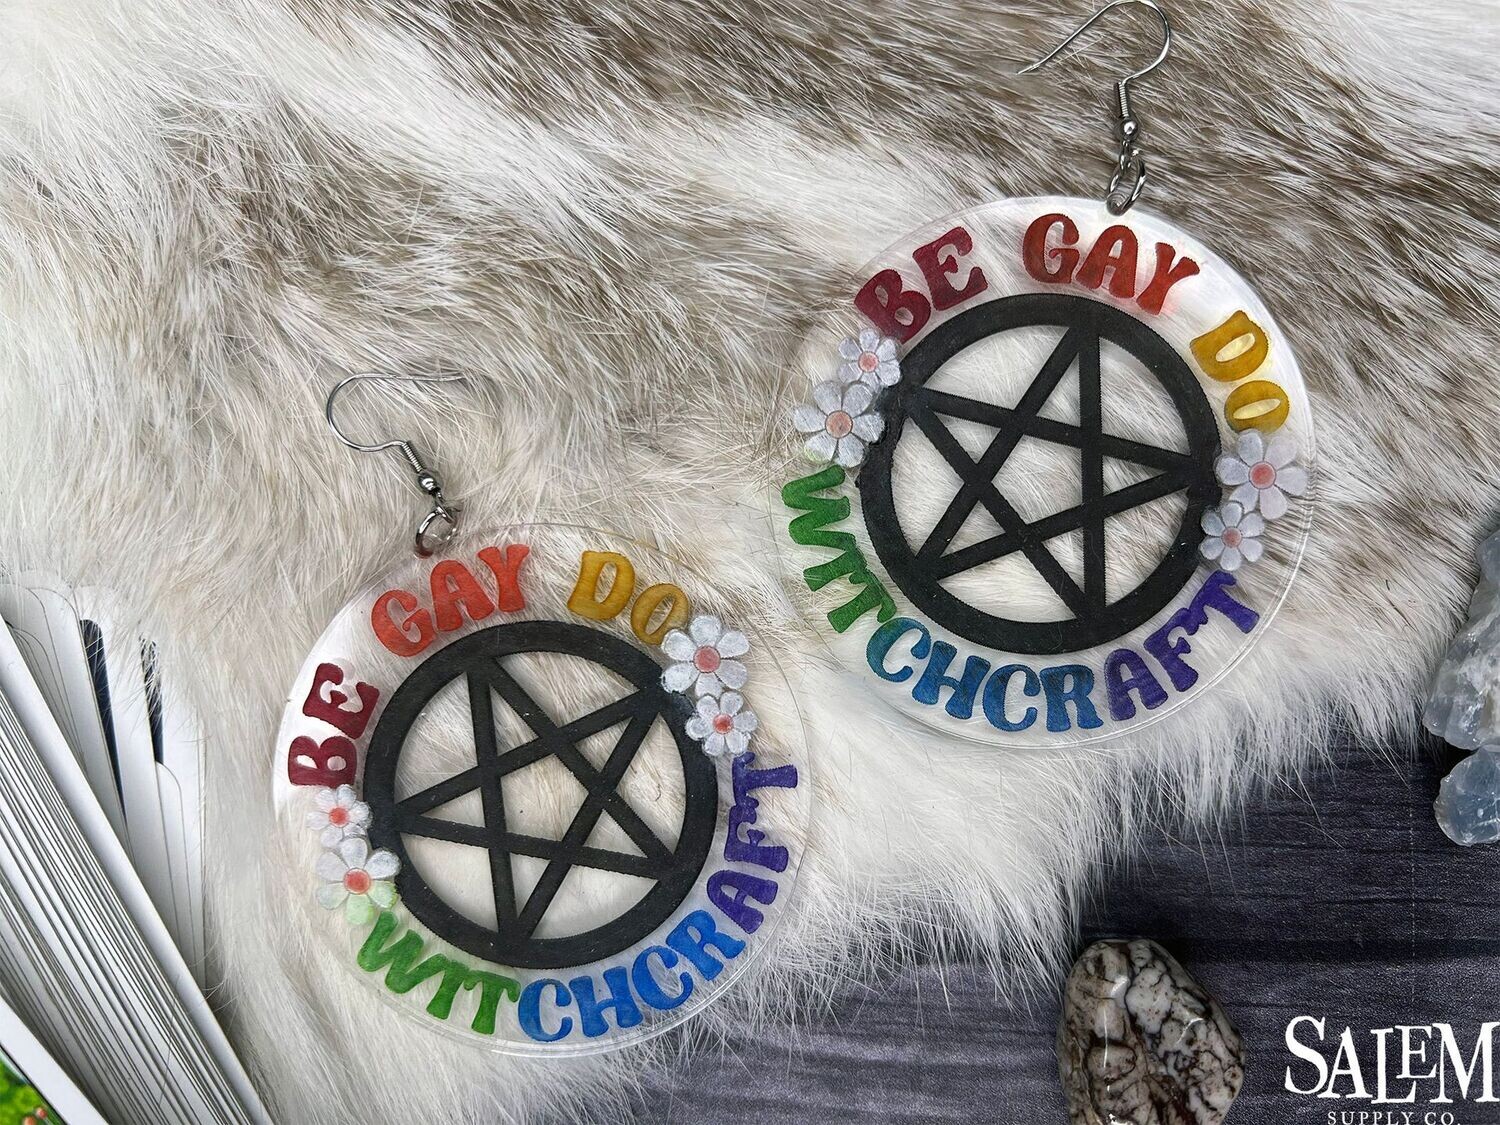 "Be Gay Do Witchcraft" Pentacle Dangle Earrings